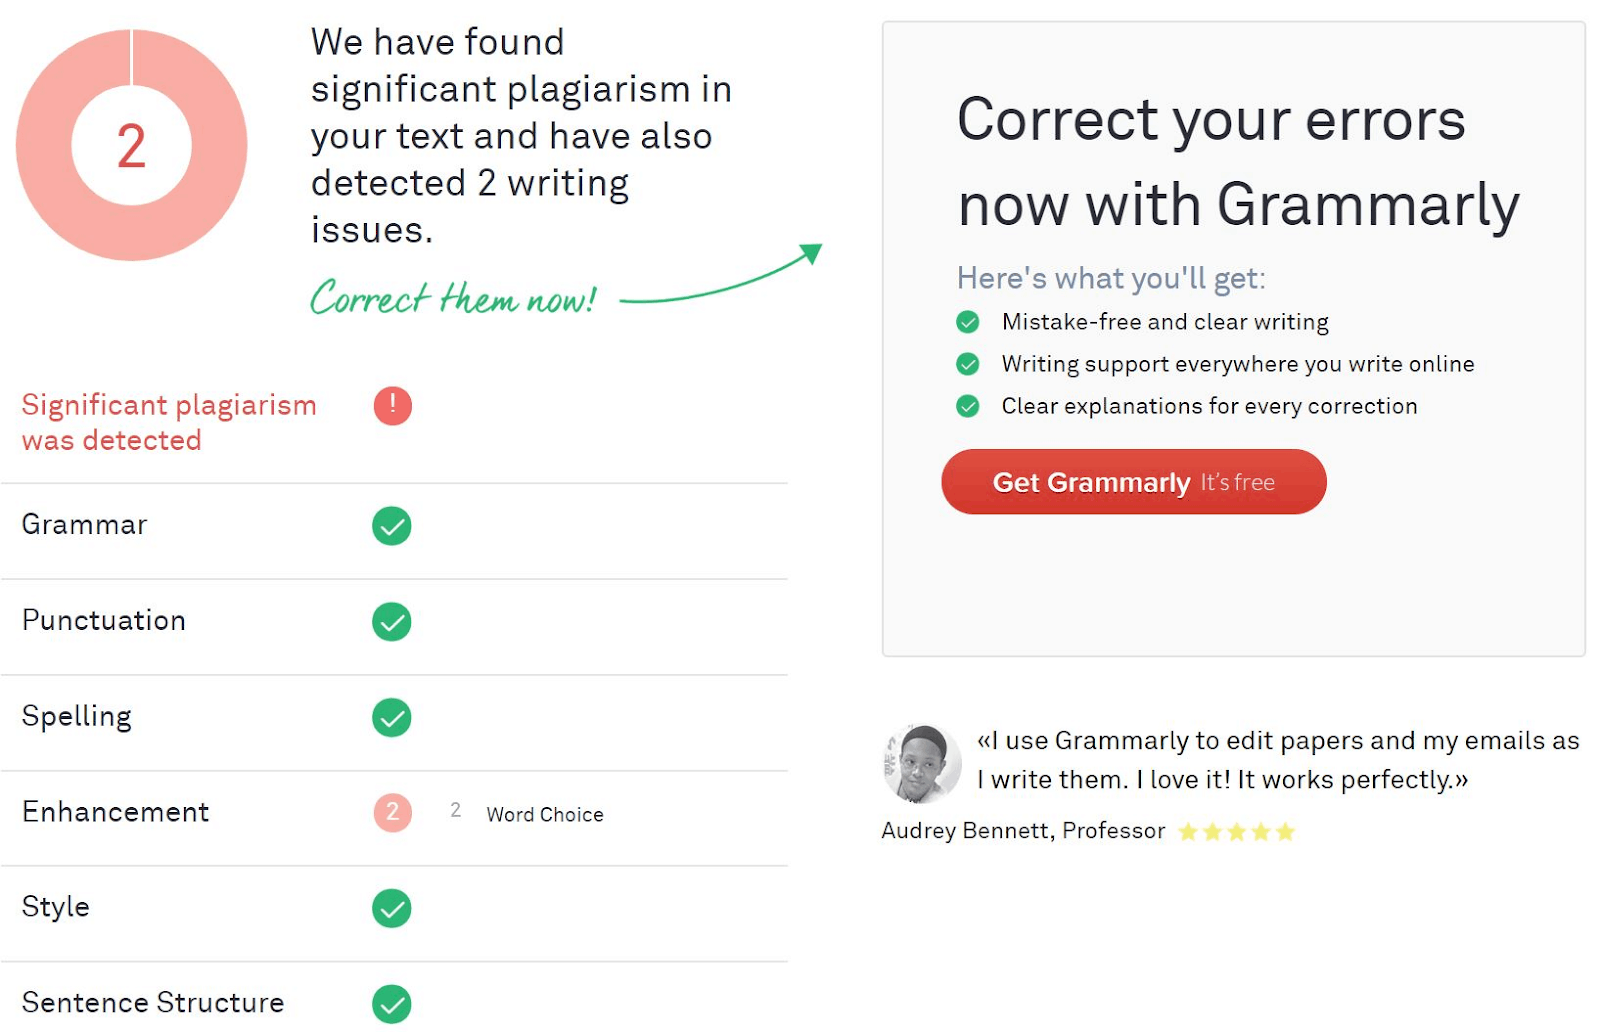 Is Grammarly Plagiarism Checker Accurate? (Honest Review)